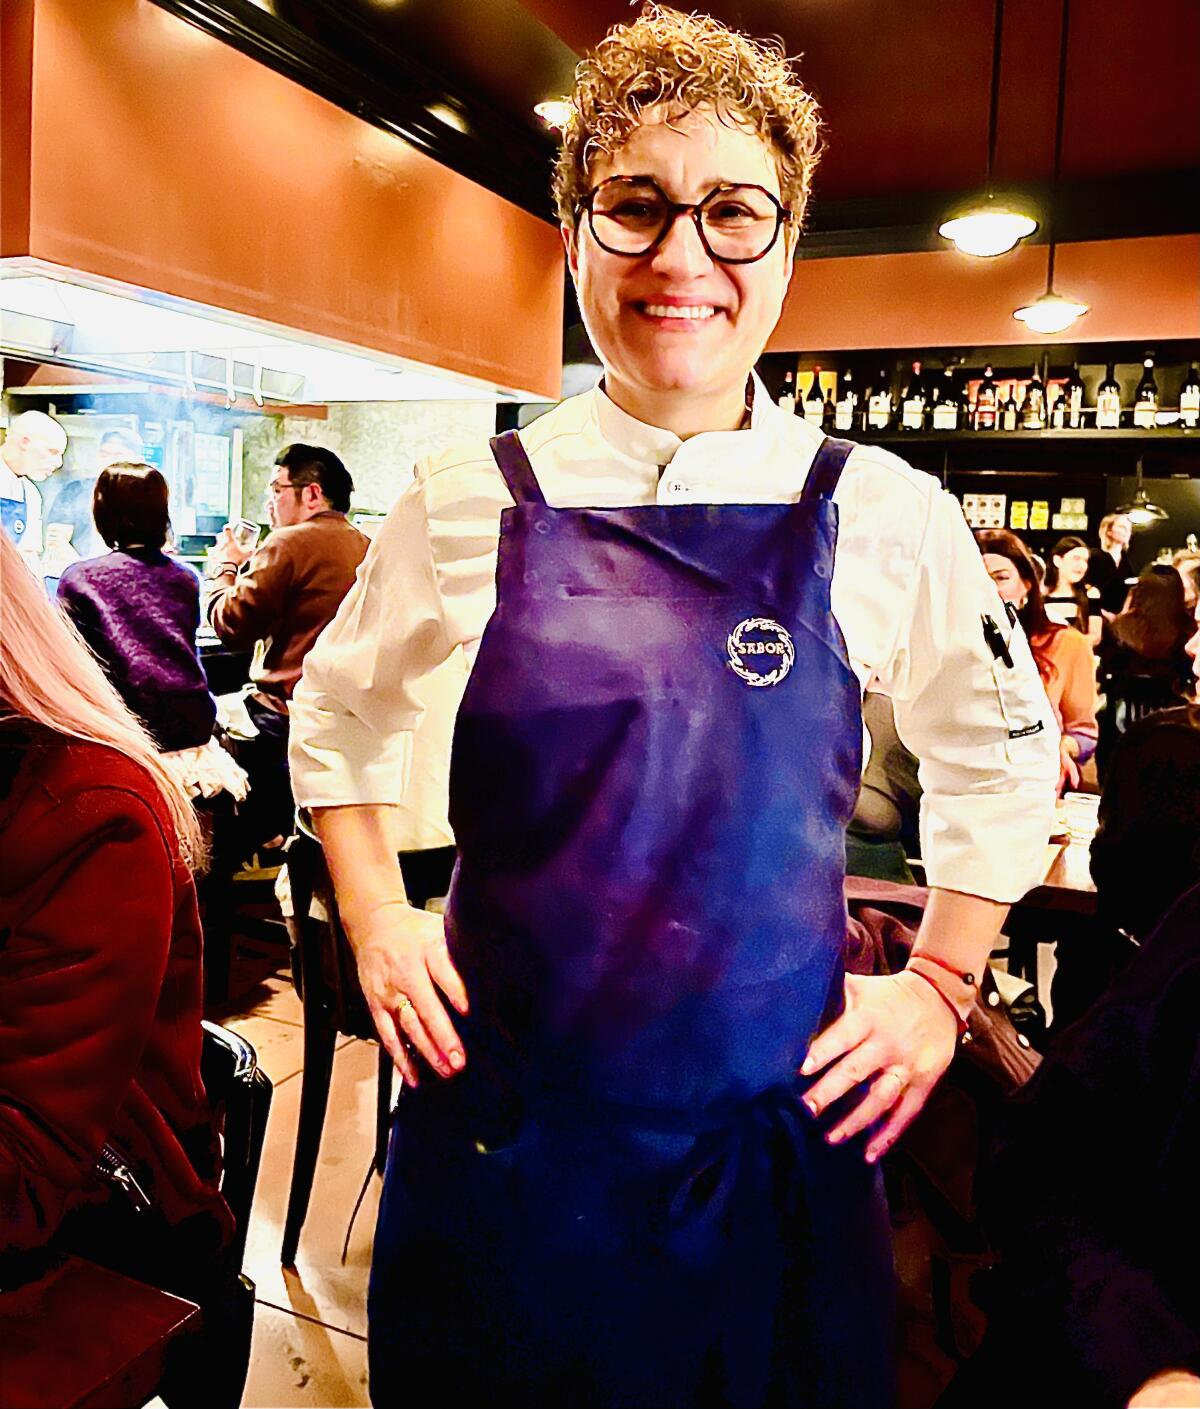 Nieves Barragán Mohacho of Sabor in London making a guest chef appearance at Chi Spacca in Los Angeles.